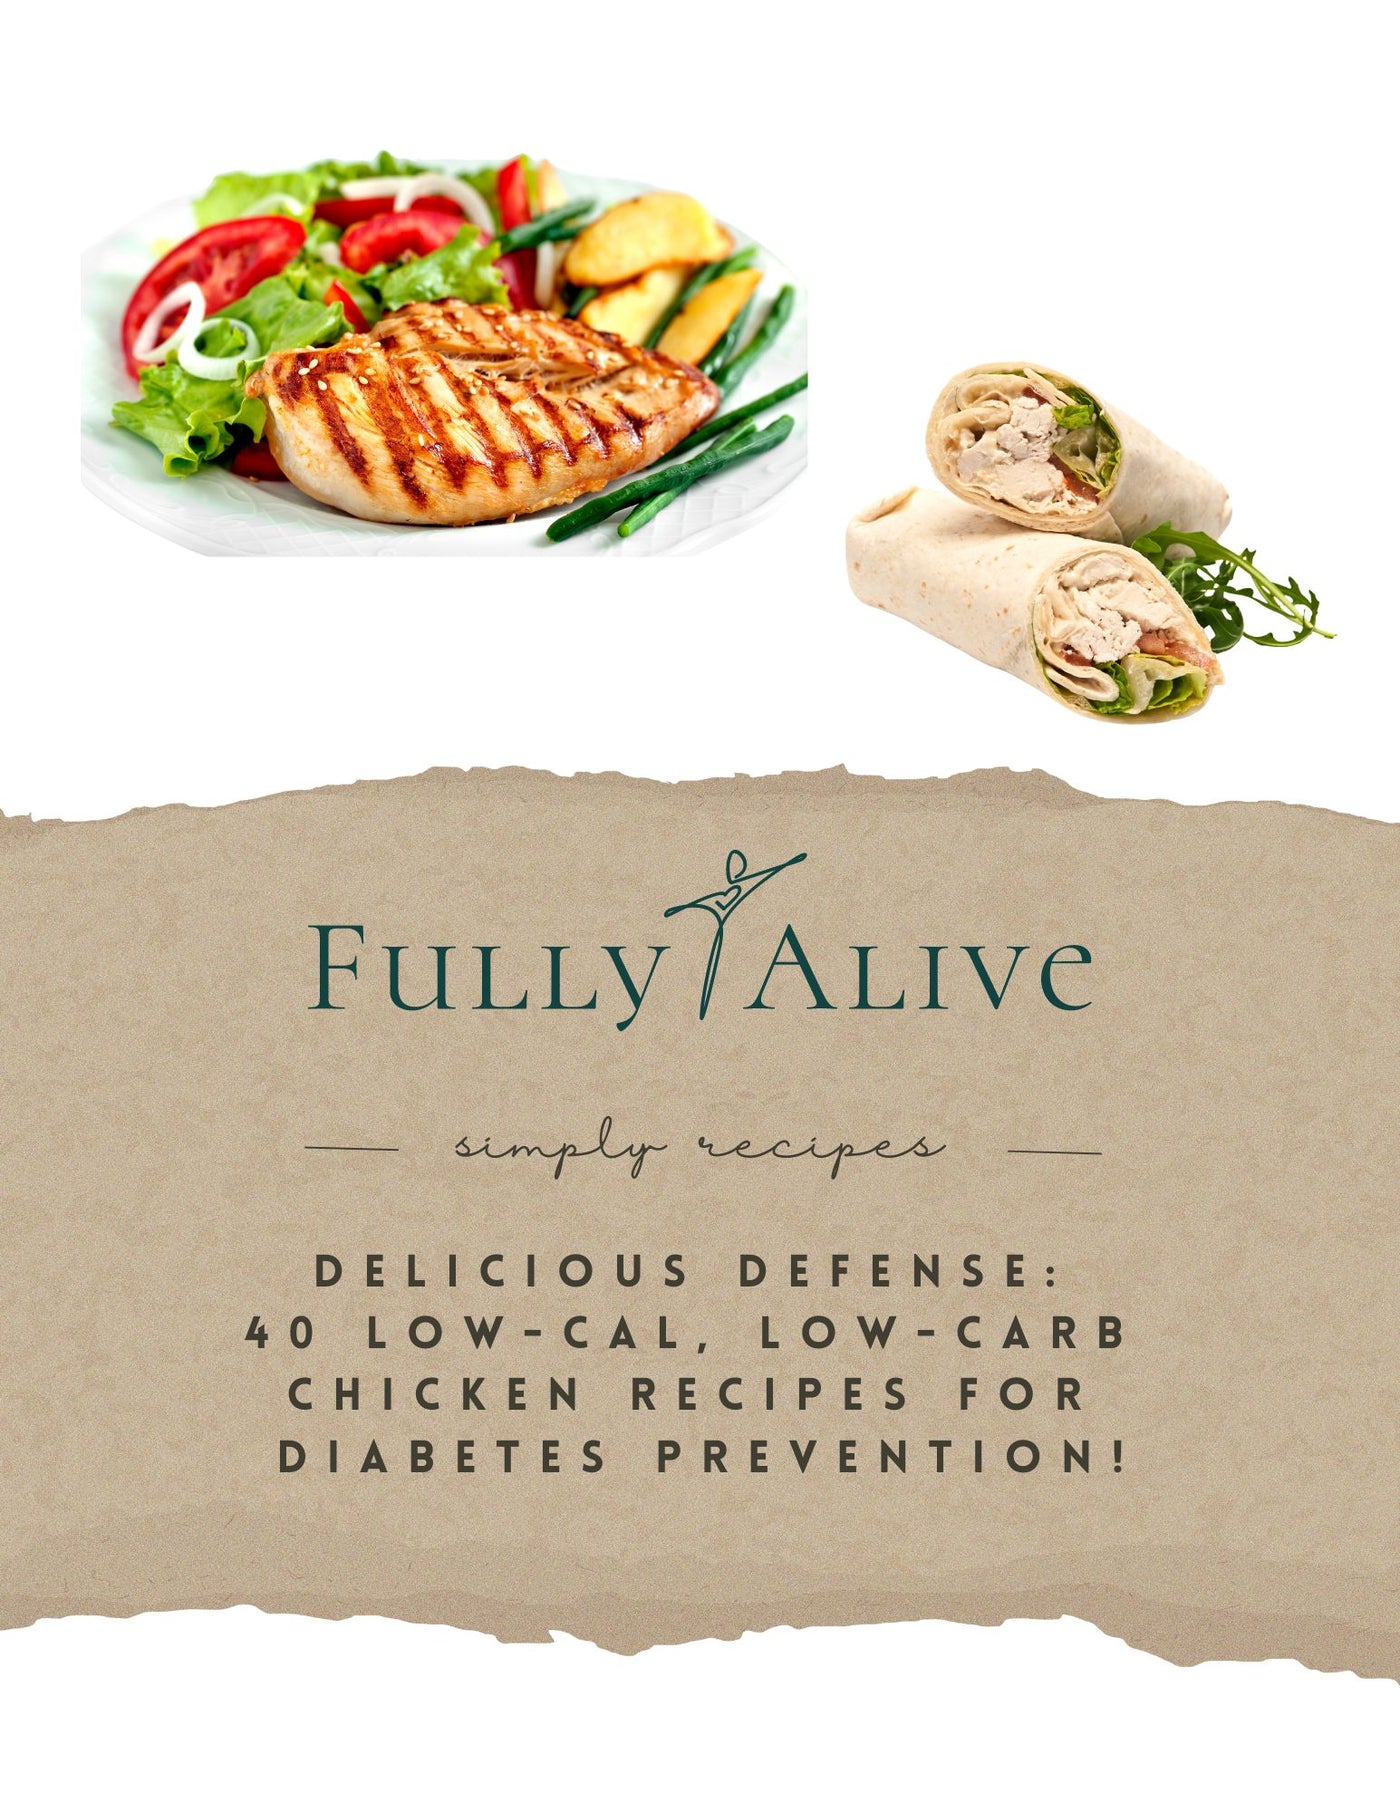 Delicious Defense: 40 Low-Cal, Low-Carb Chicken Recipes for Diabetes Prevention!